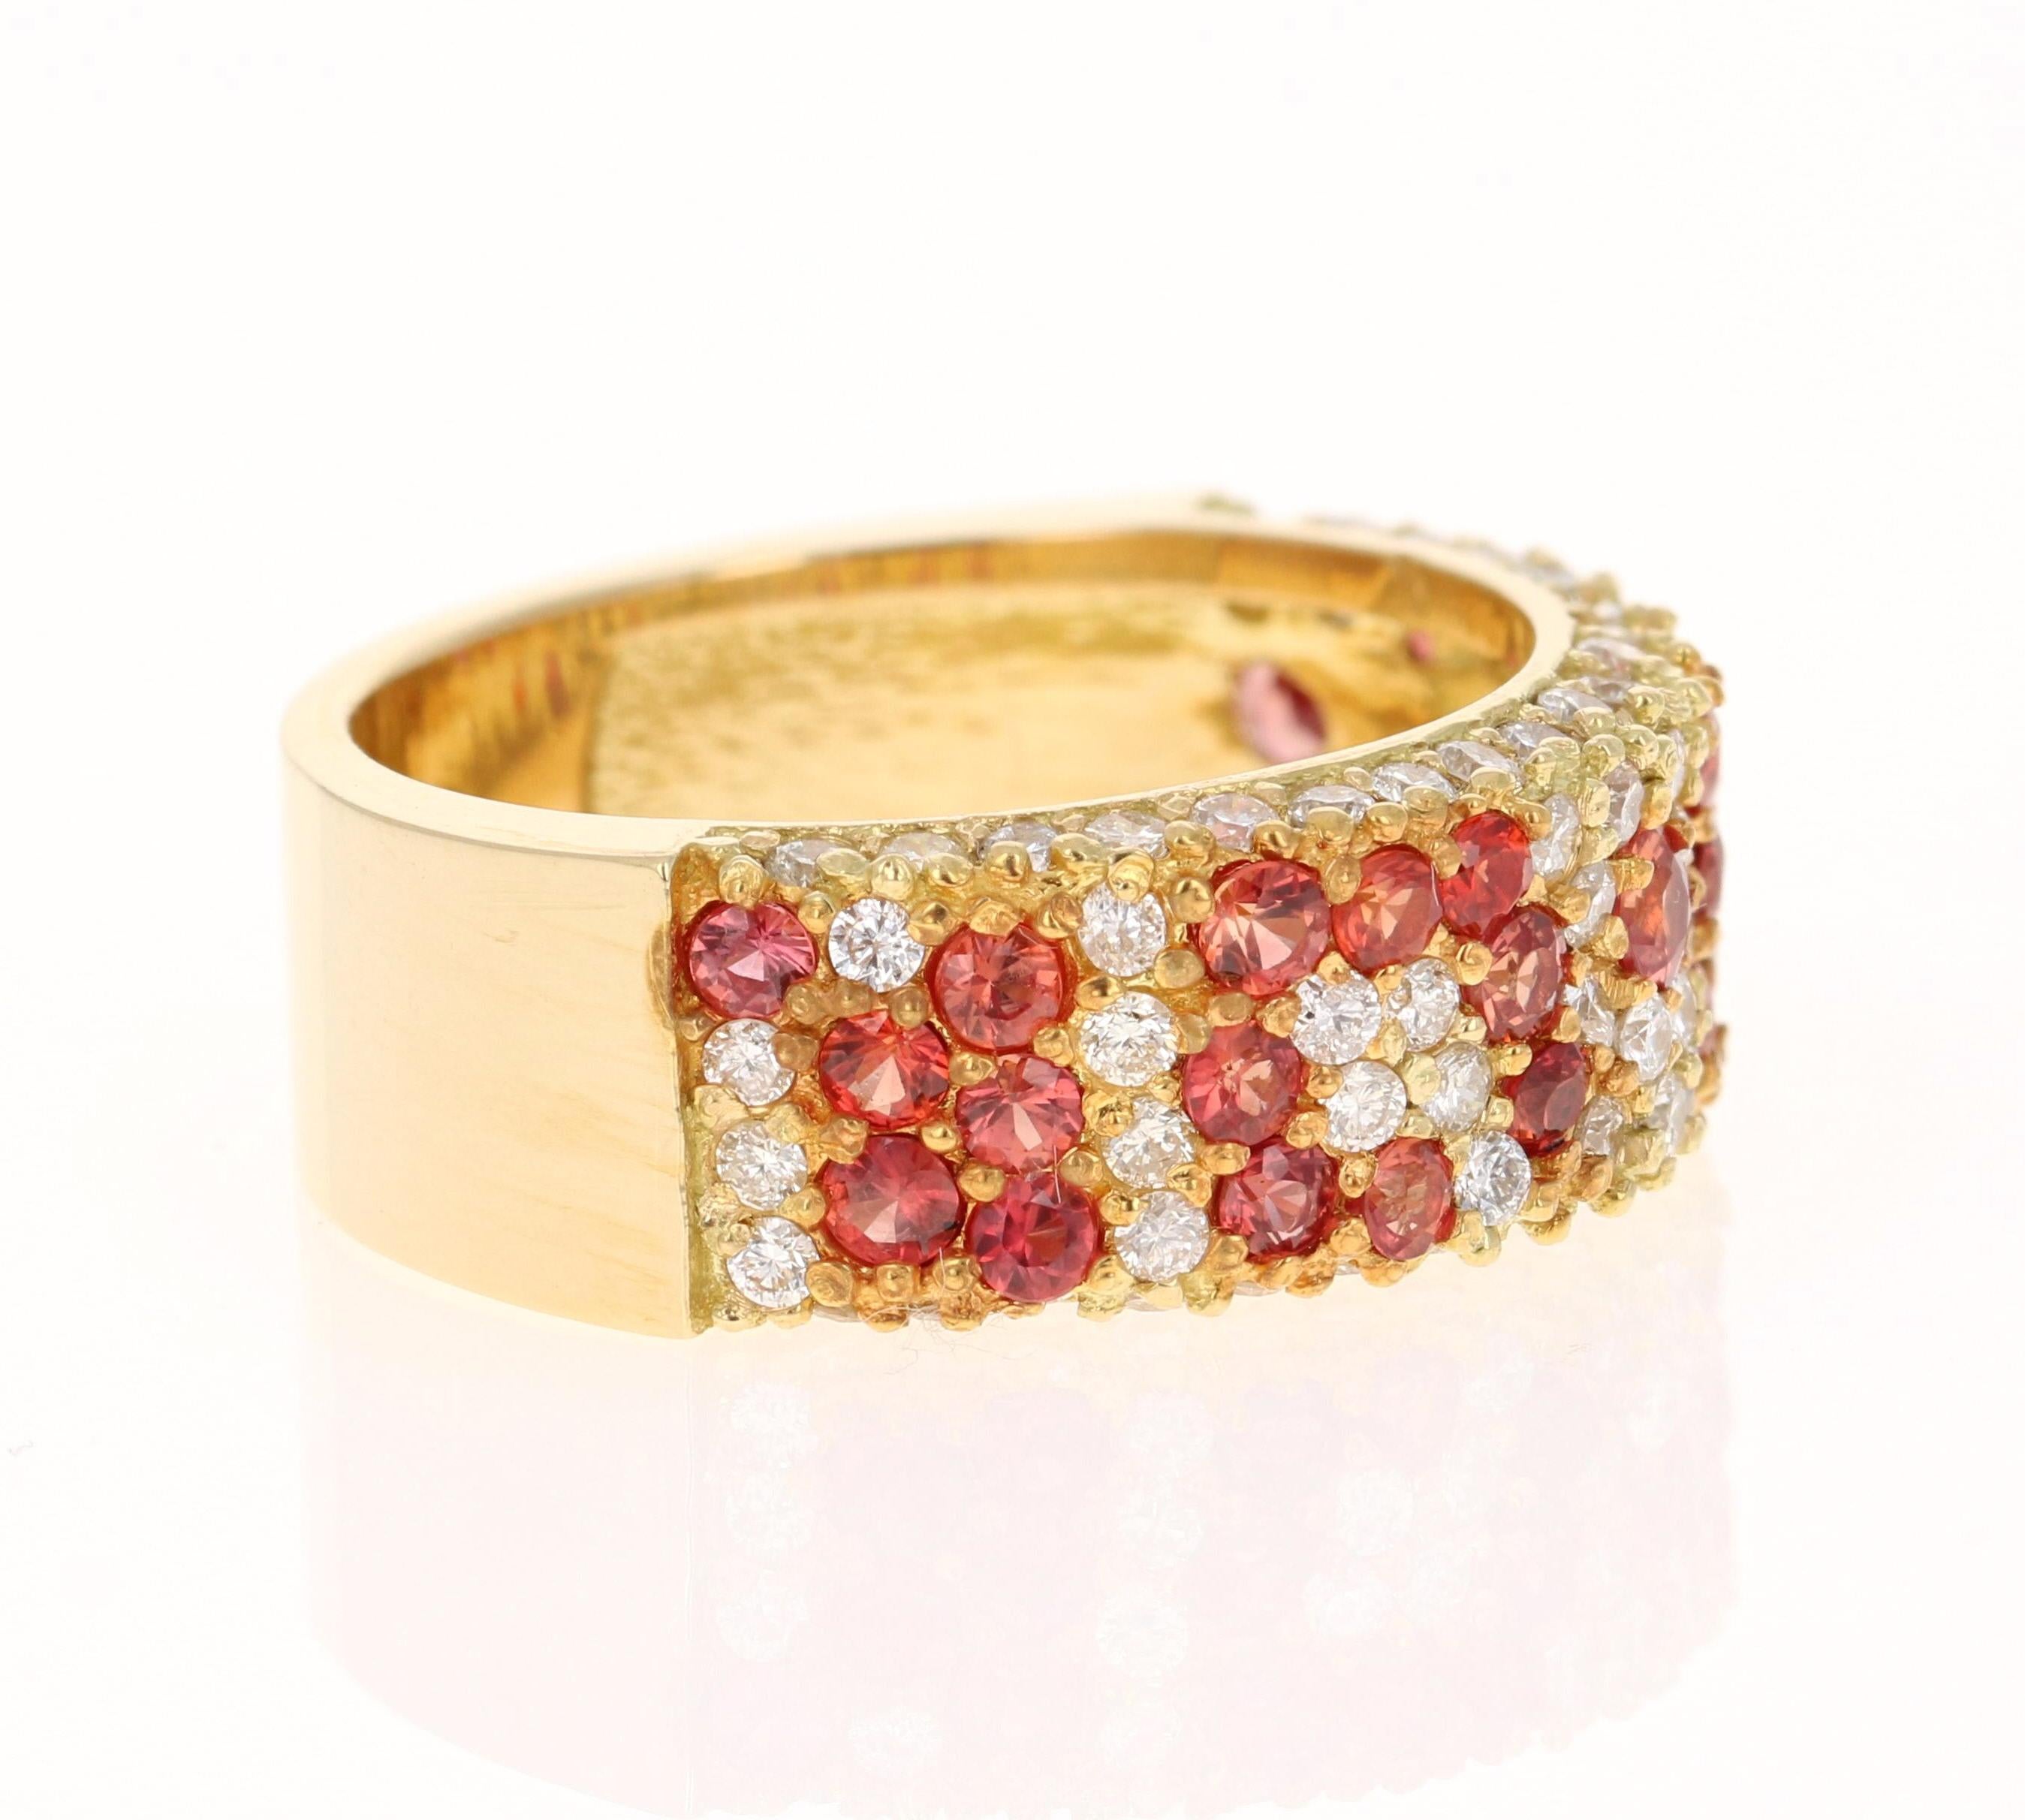 This band has 31 Red Sapphires that weigh 1.30 carats and 81 Round Cut Diamonds that weigh 0.99 carats. (Clarity: SI, Color: F) The total carat weight of the ring is 2.29 carats. 

The ring is designed in 18 Karat Yellow Gold and weighs